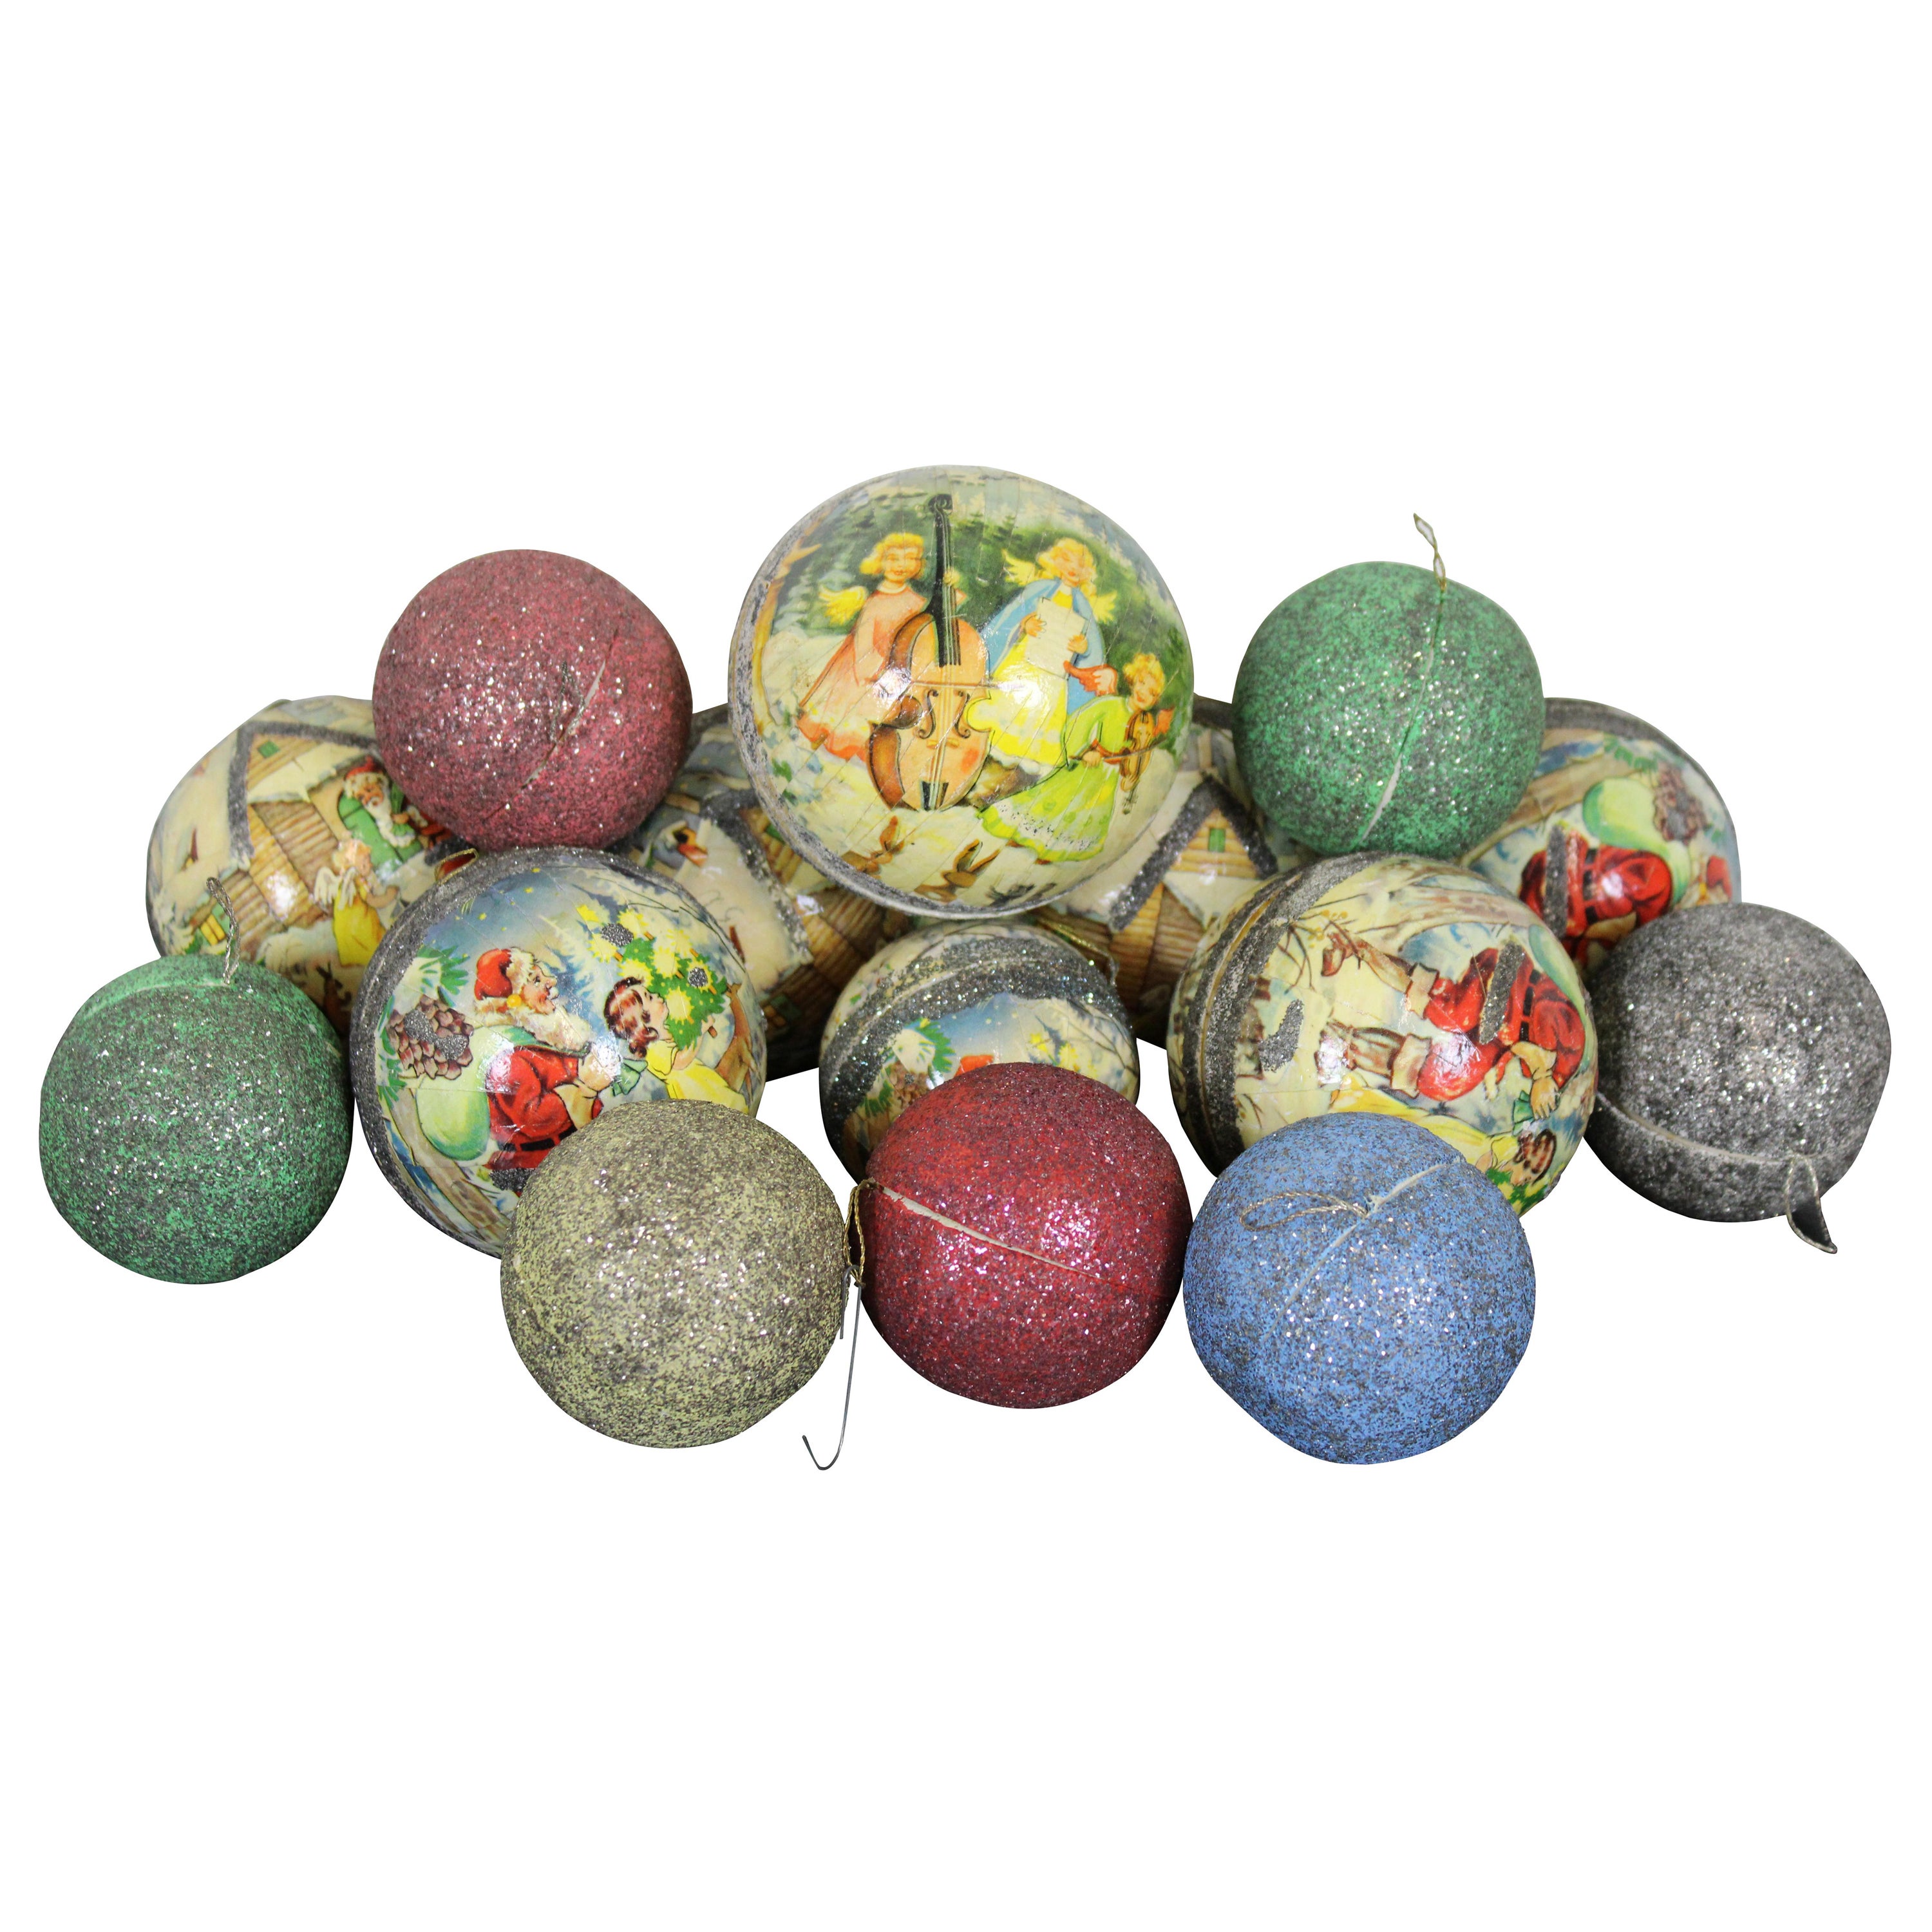 15 1950s German Paper Mache Christmas Tree Candy Container Ball Ornaments